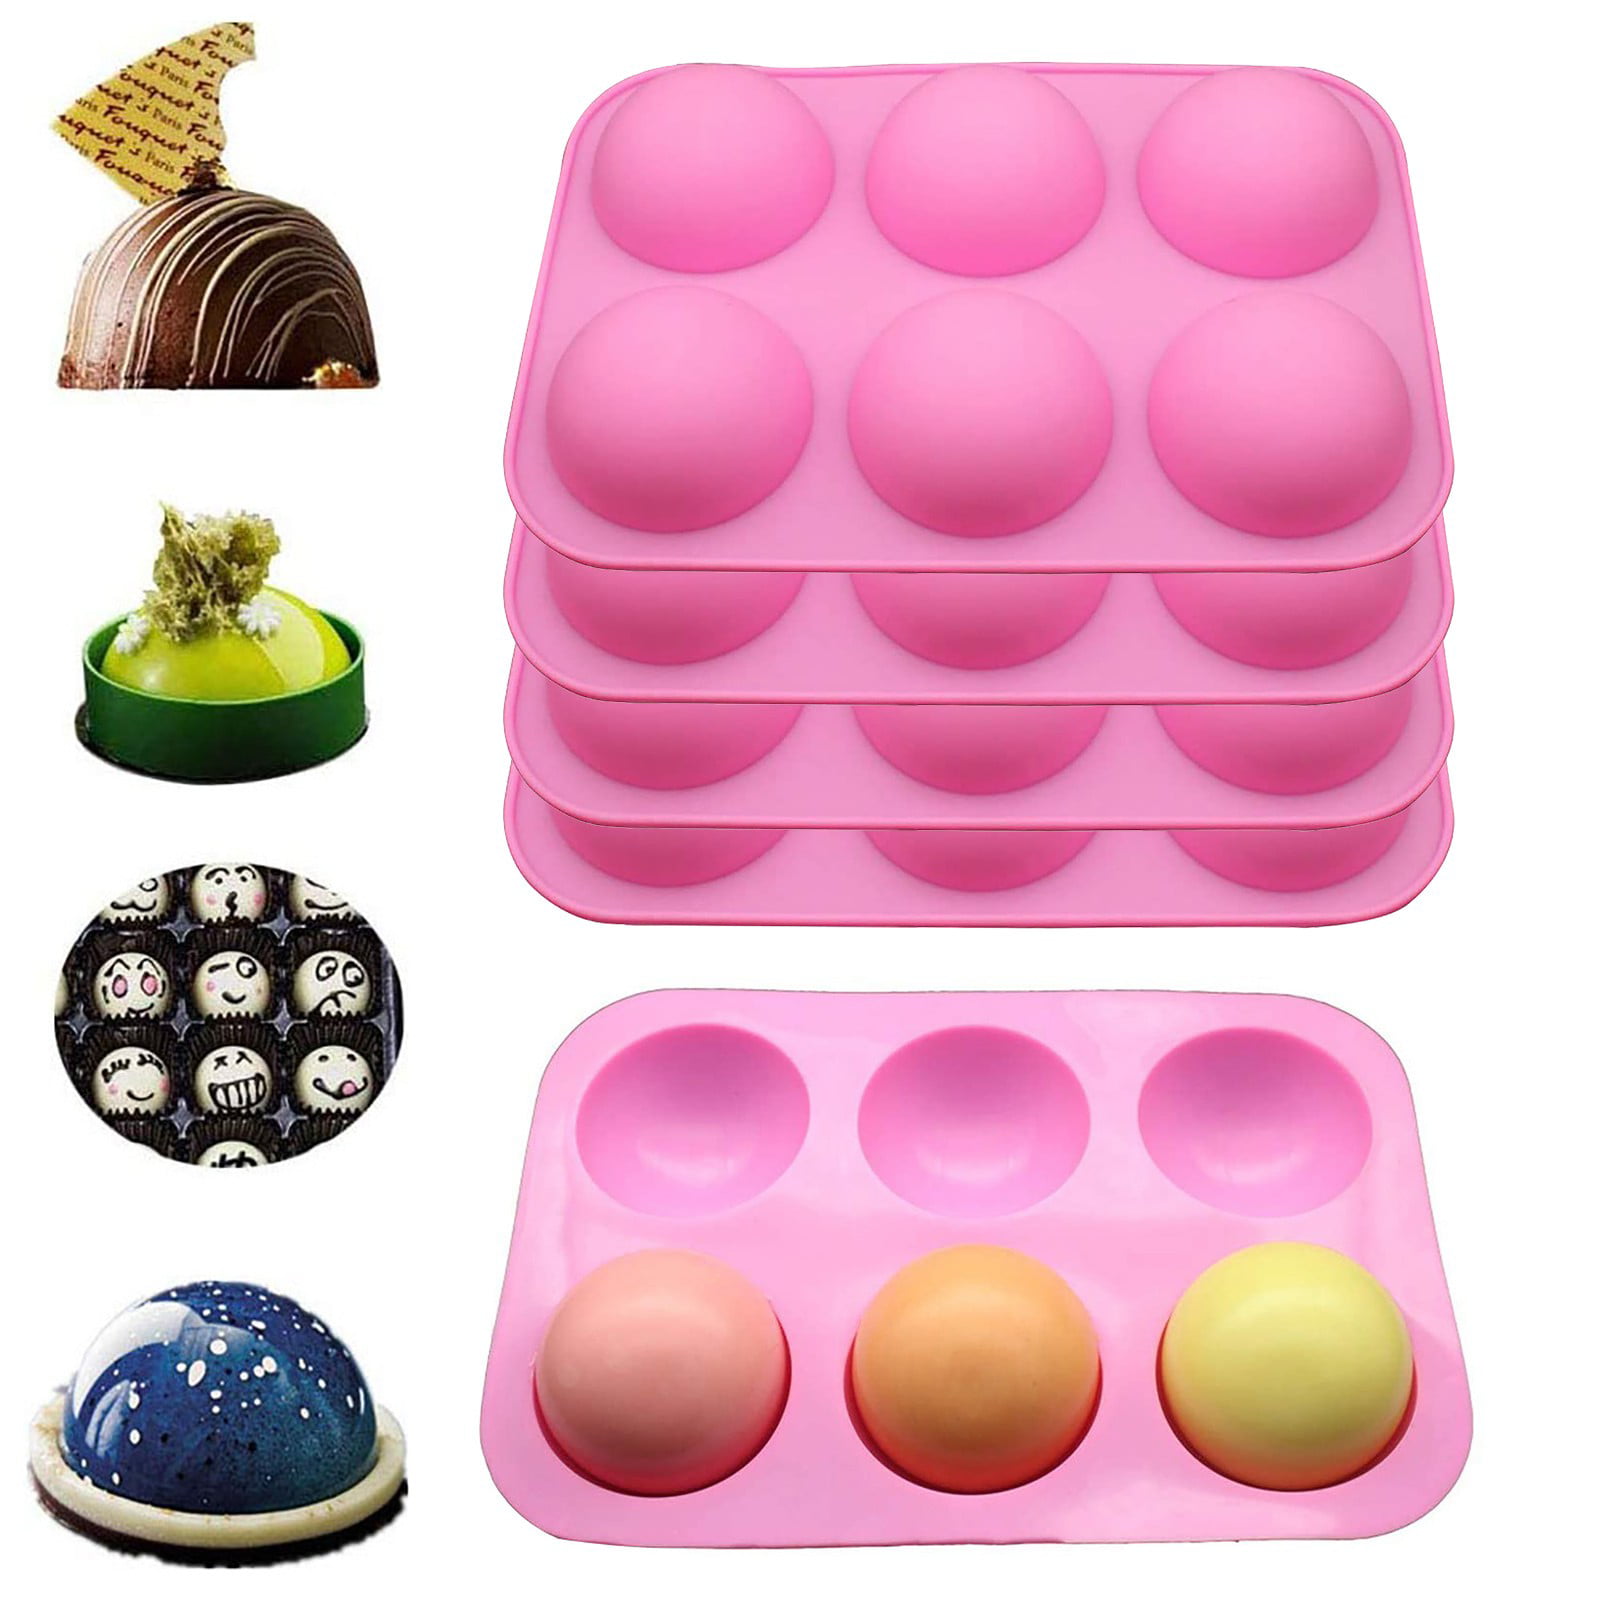 Silicone 6Cavity Cake Mold Baking Pan Half Sphere Chocolate Muffin Baking Mould 